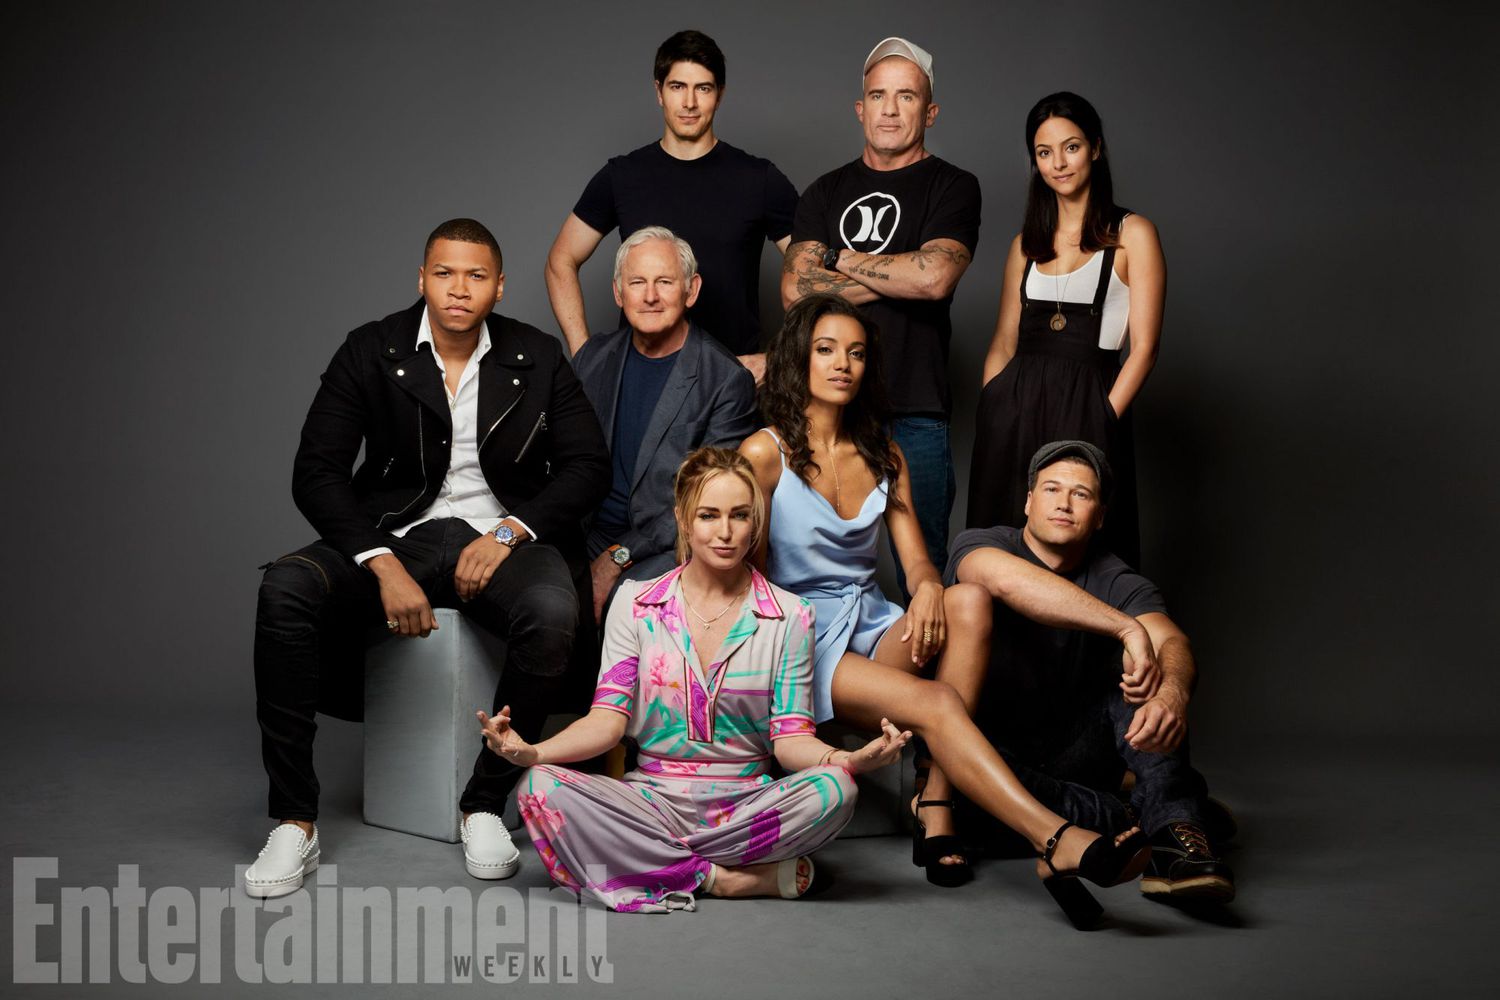 DC'S Legends of Tomorrow stars: (standing) Brandon Routh, Dominic Purcell,&nbsp;Tala Ashe,&nbsp;(sitting) Franz Drameh, Victor Garber, Caity Lotz, Maisie Richardson-Sellers, and Nick Zano